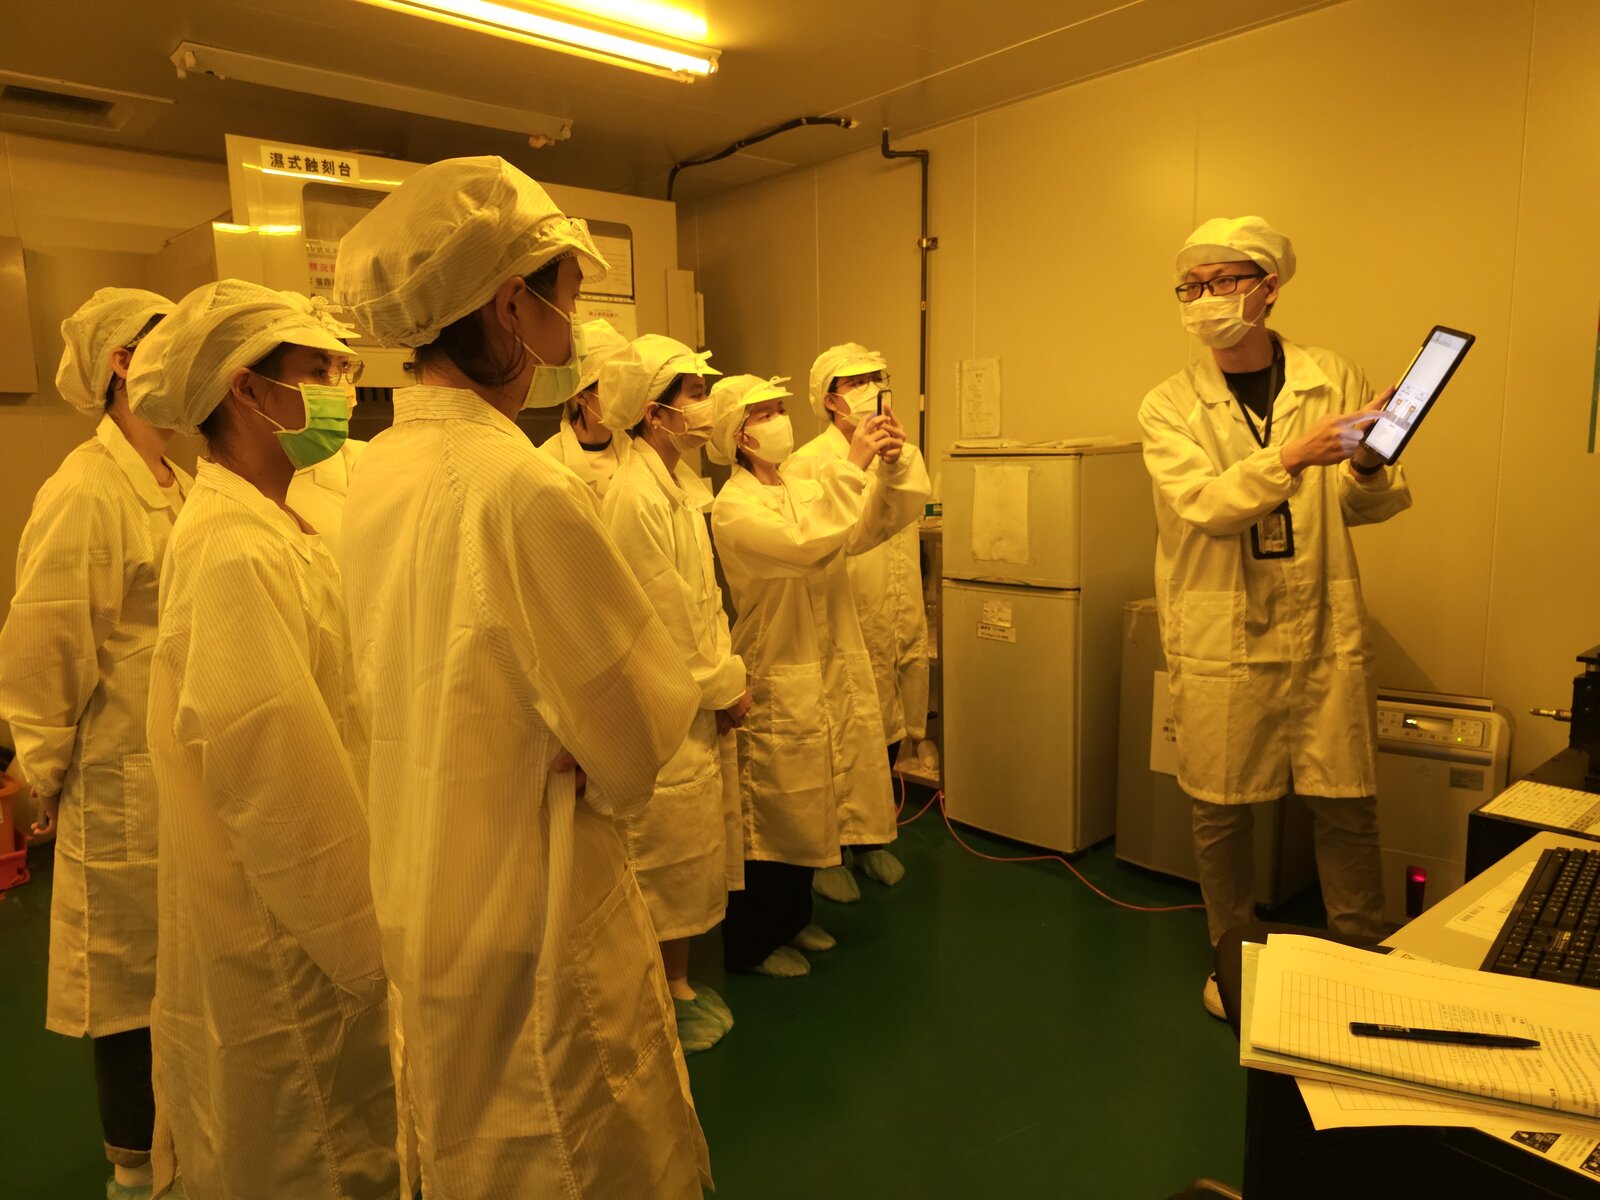 The activity visited the Yellow Light Laboratory led by Chair Professor Ting-Chang Chang of the Department of Physics.